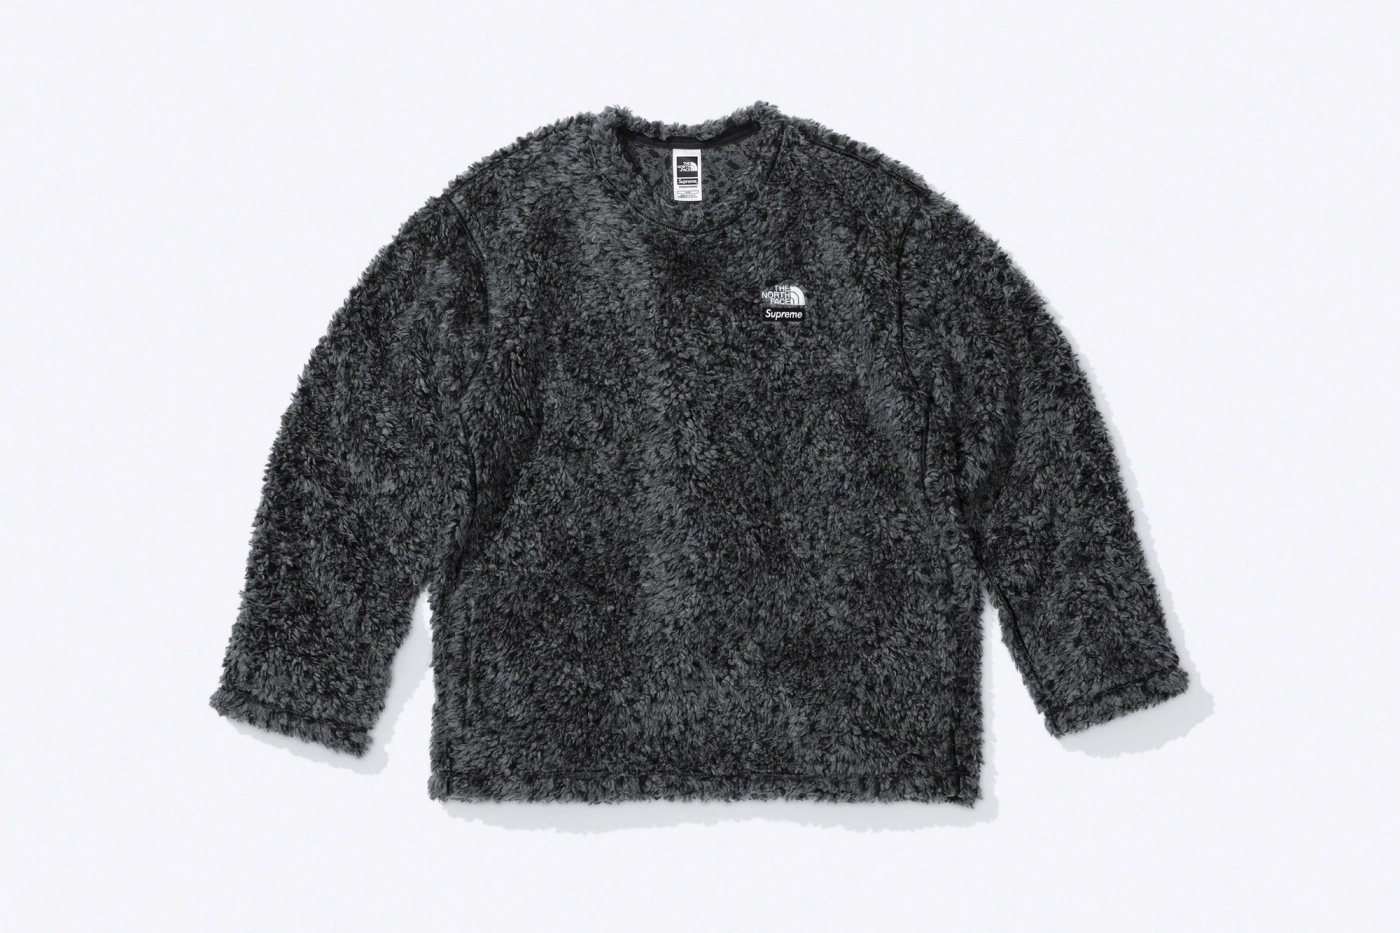 Supreme®/The North Face® High Pile Fleece Pullover